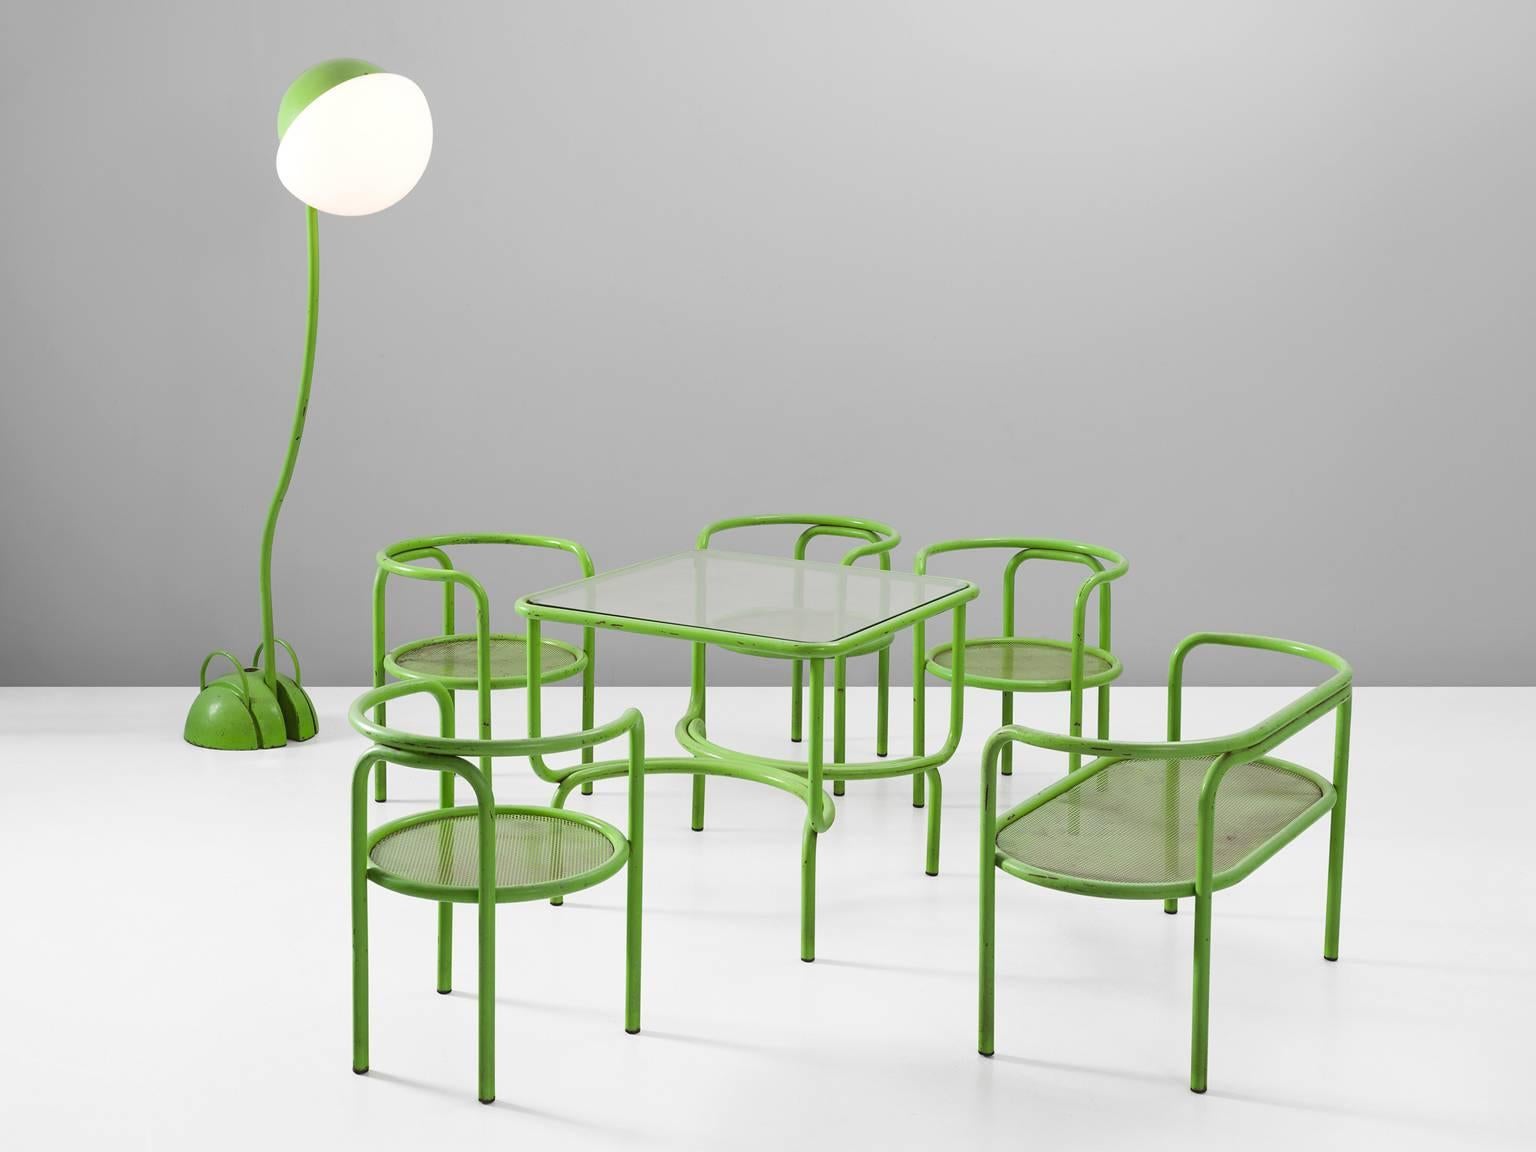 Locus Solus floor lamp, in metal glass, by Gae Aulenti for Poltronova, Italy, 1963.

Large green floor lamp. Part of the complete Locus Solus salon set, which is sold separately. The set consists of four chairs, one bench and one table, the floor